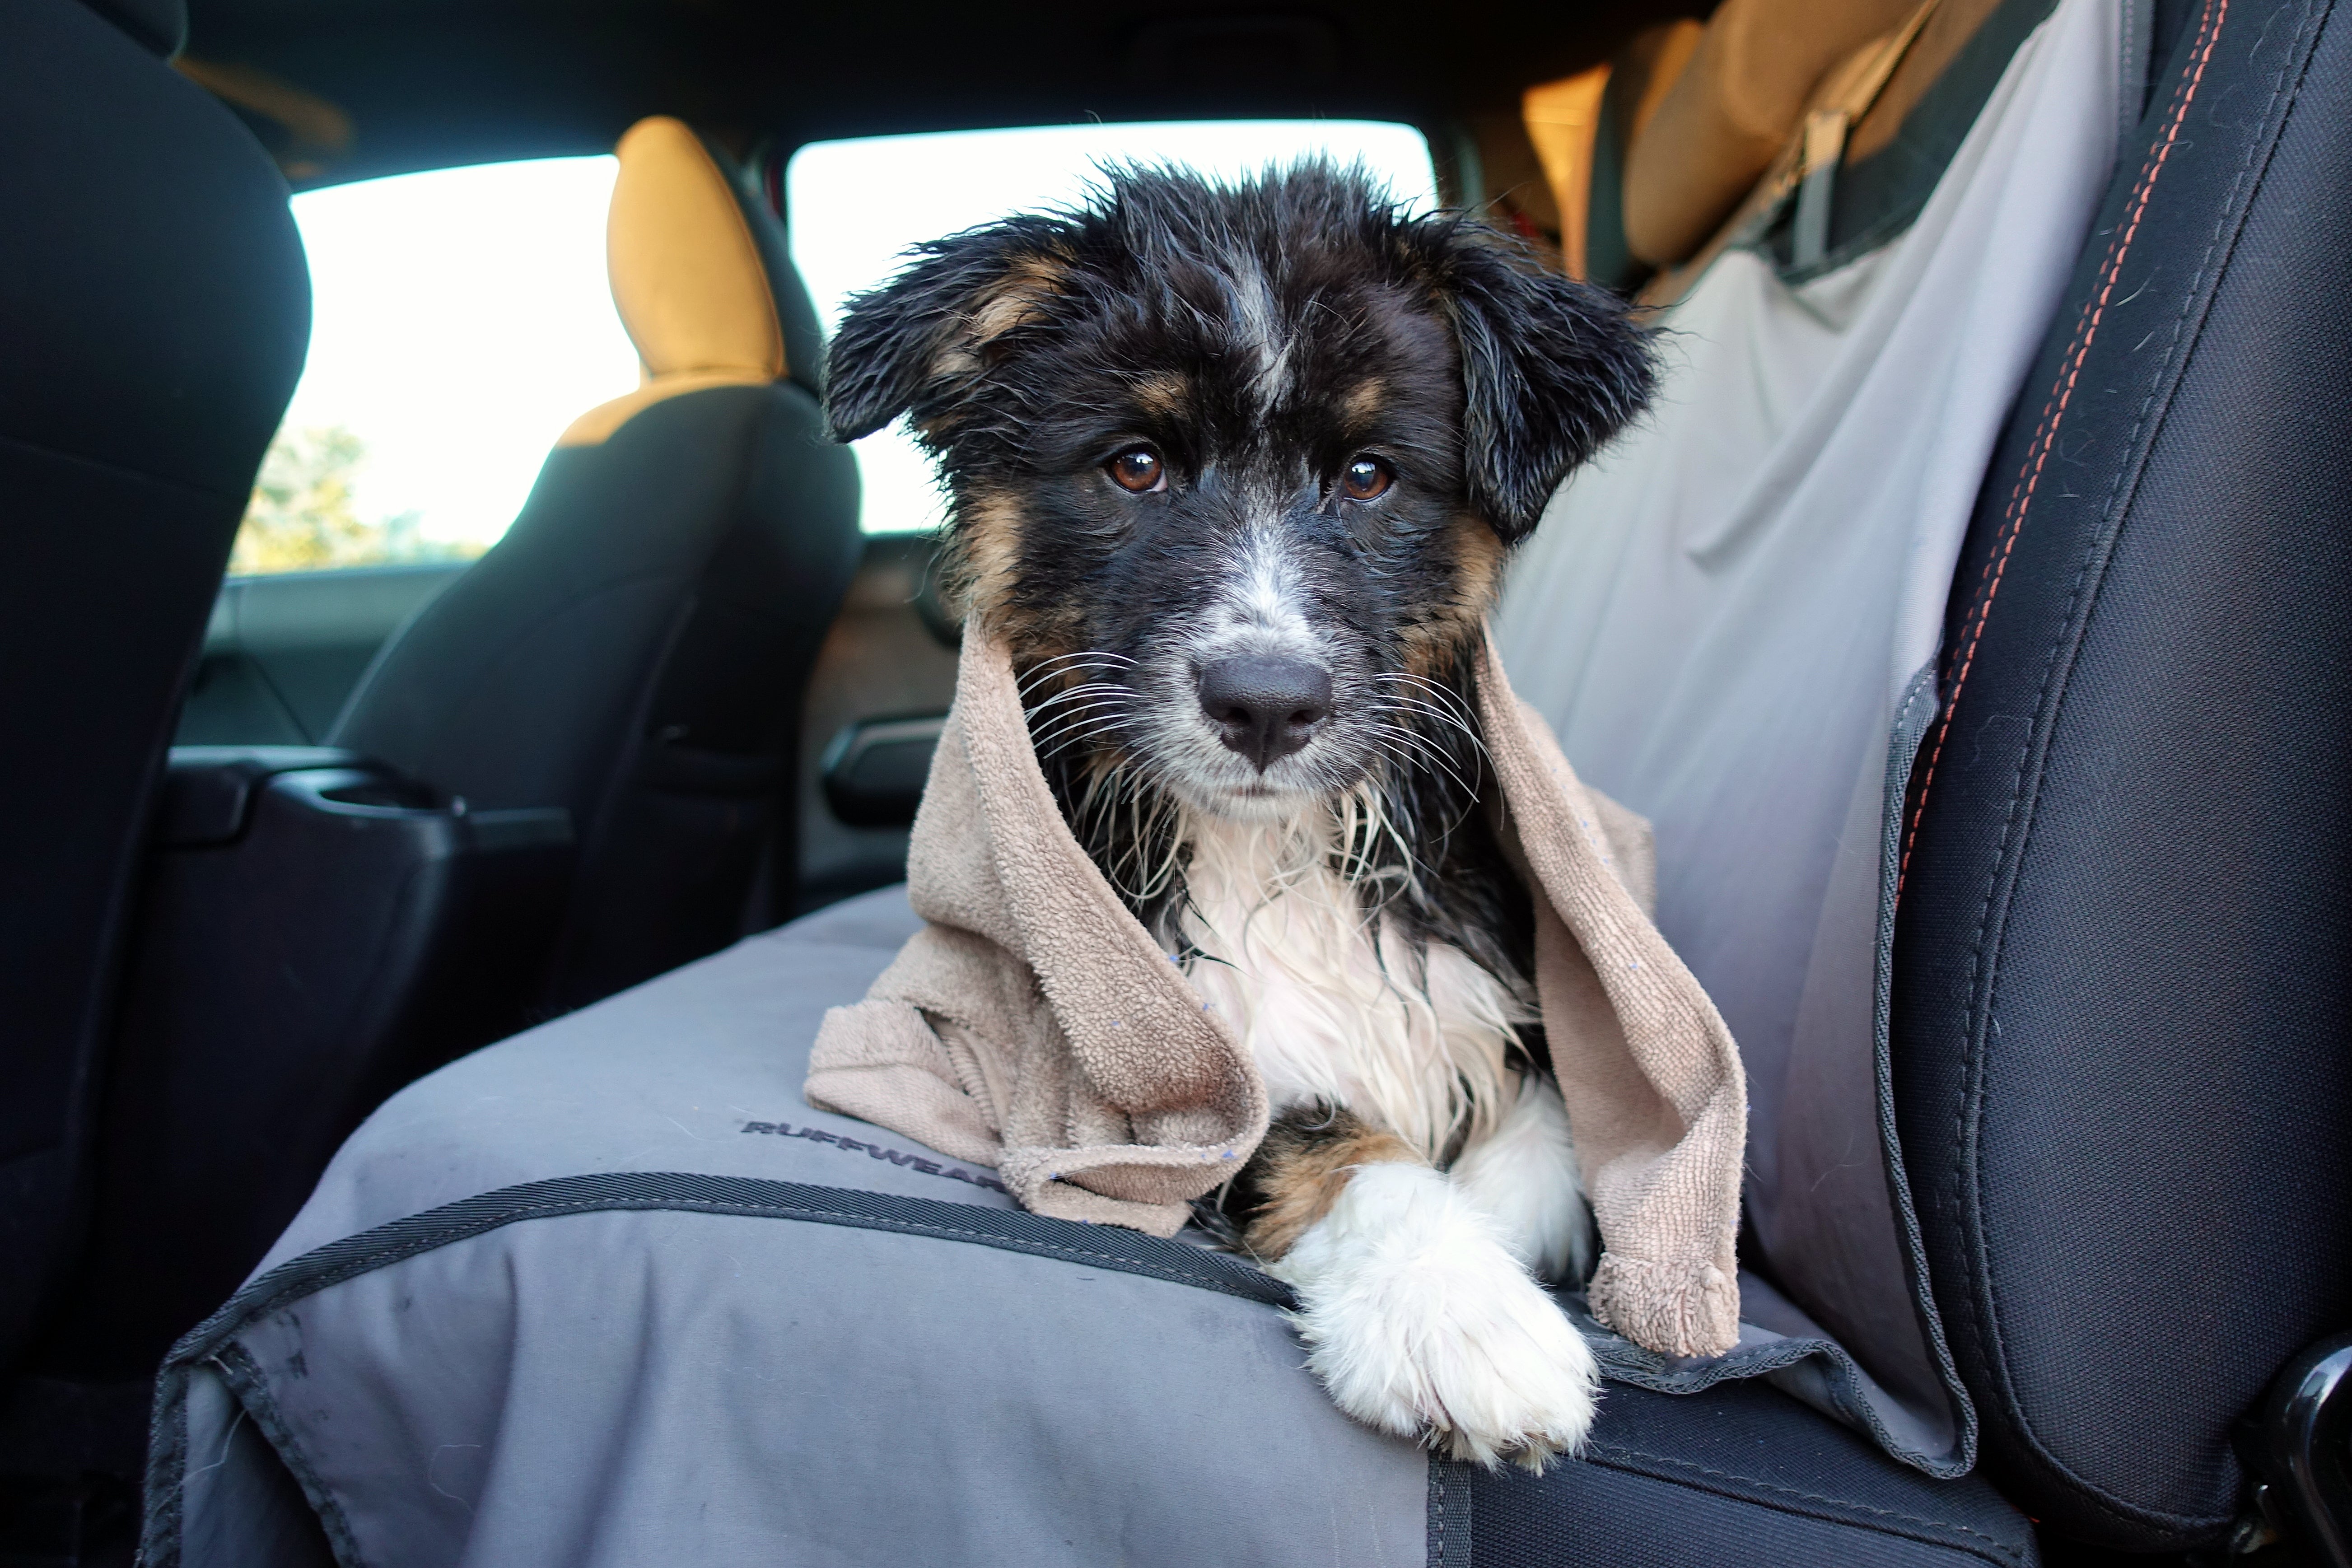 Willow soaking wet from playing in water wrapped in towel sitting on Dirtbag Seat Cover for dogs in car.